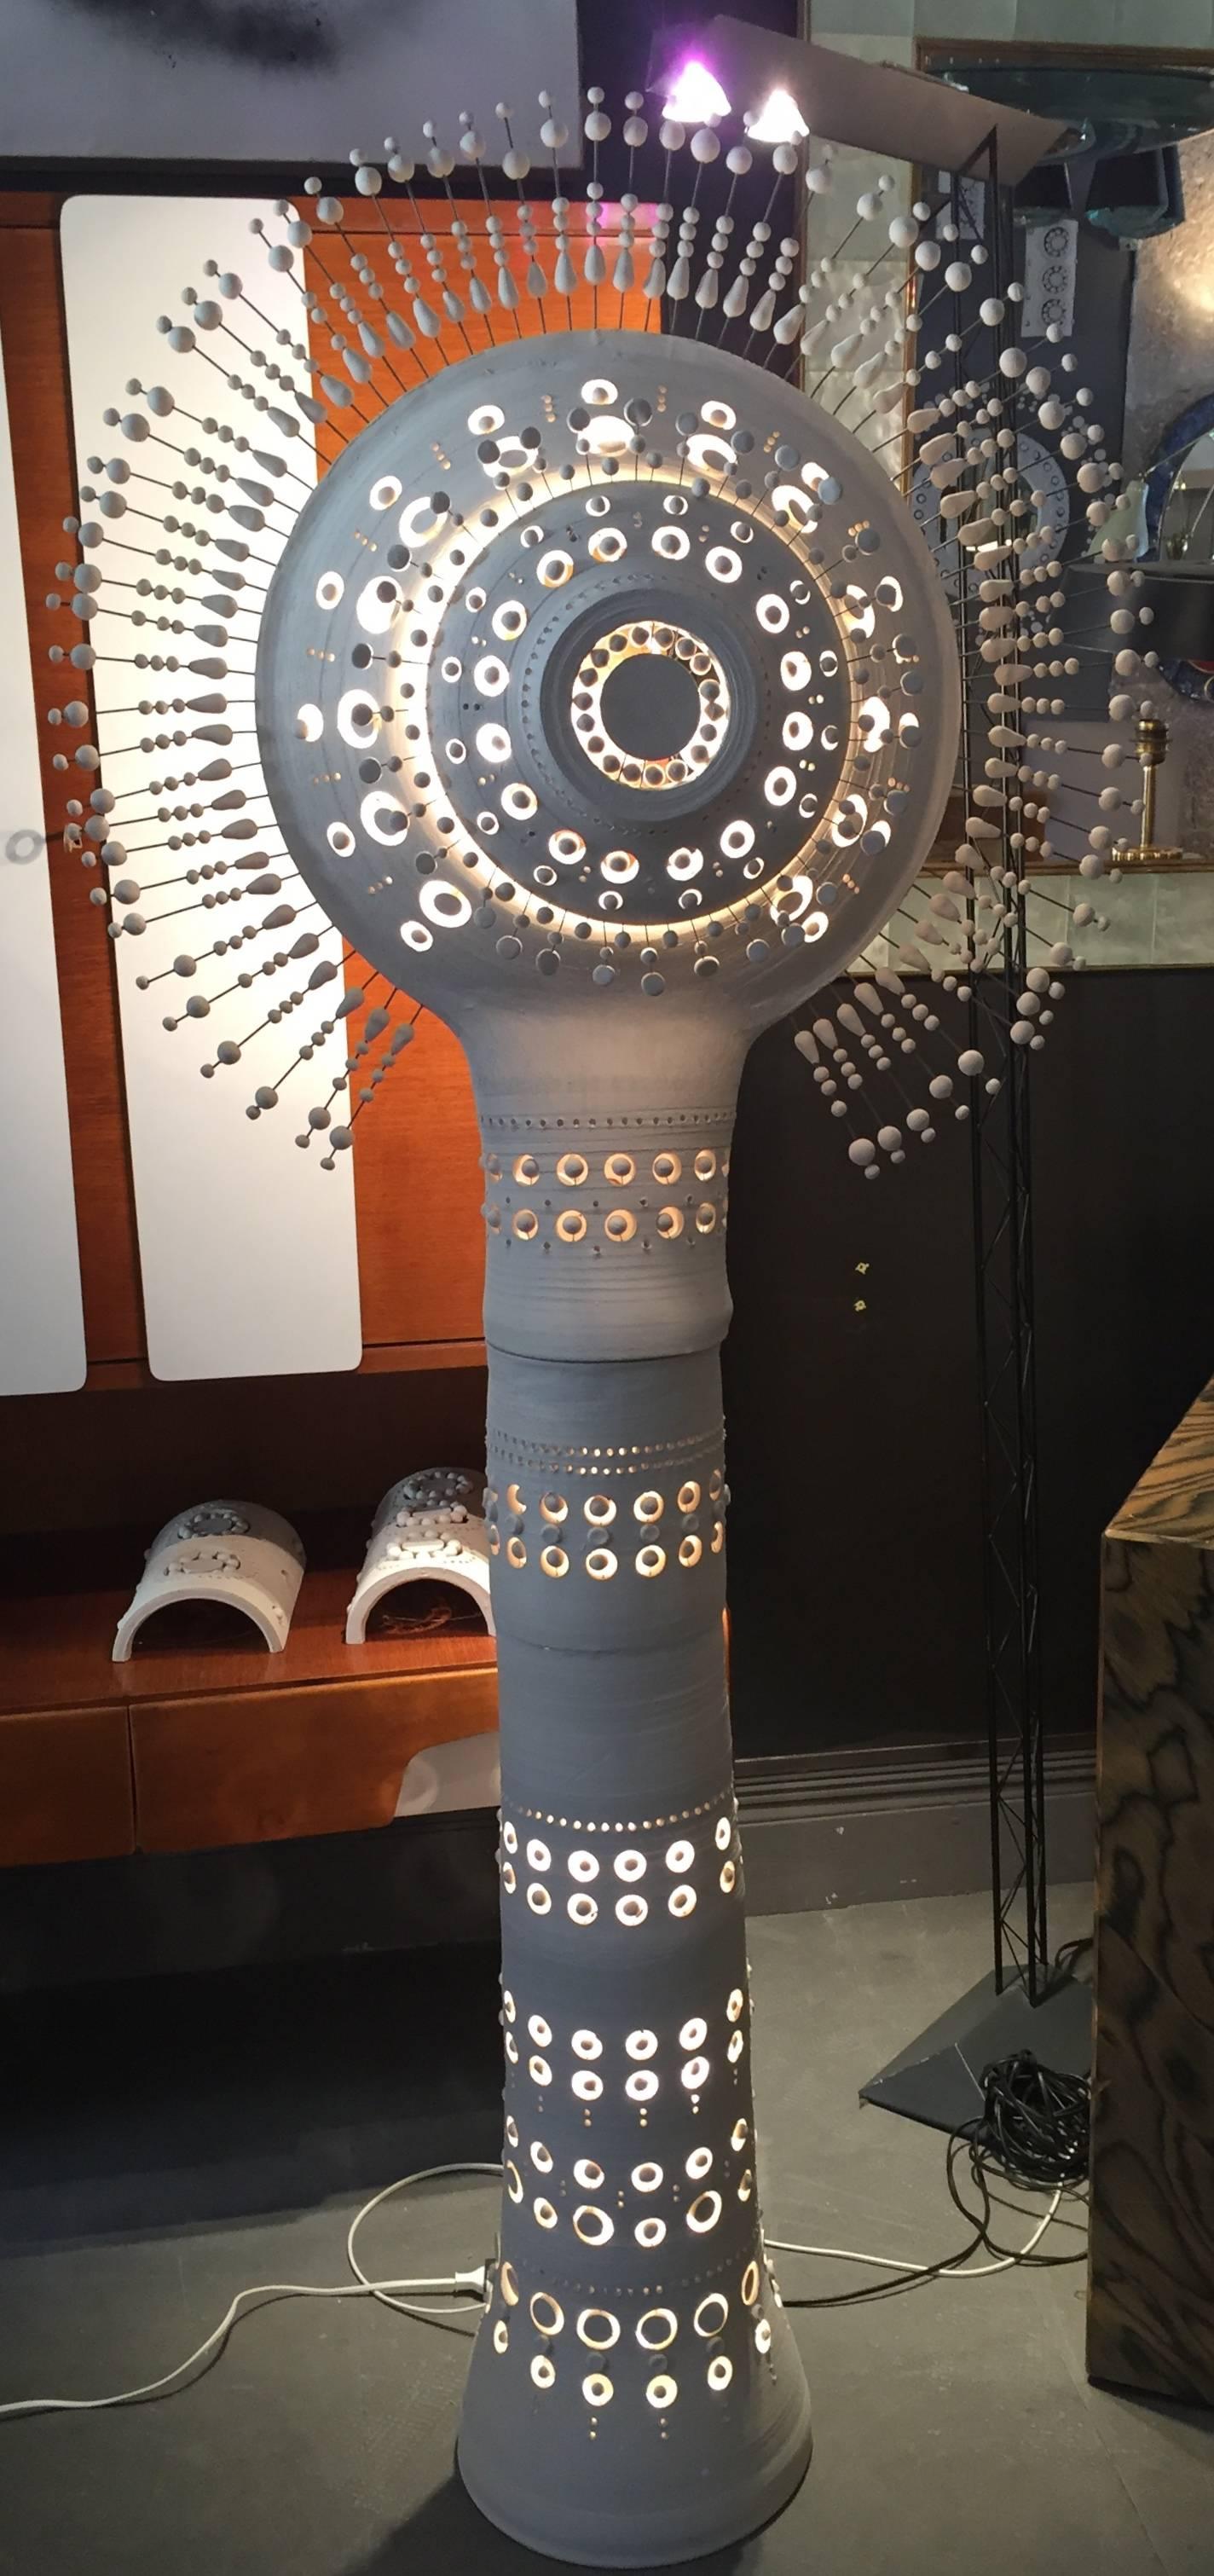 Georges Pelletier, 
beautiful Totems floor lamp, 
unglazed white ceramic, signed, 
circa 1970, France. 
Measures: Height 1m80, diameter 75 cm.
Certificate of authenticity of the artist.